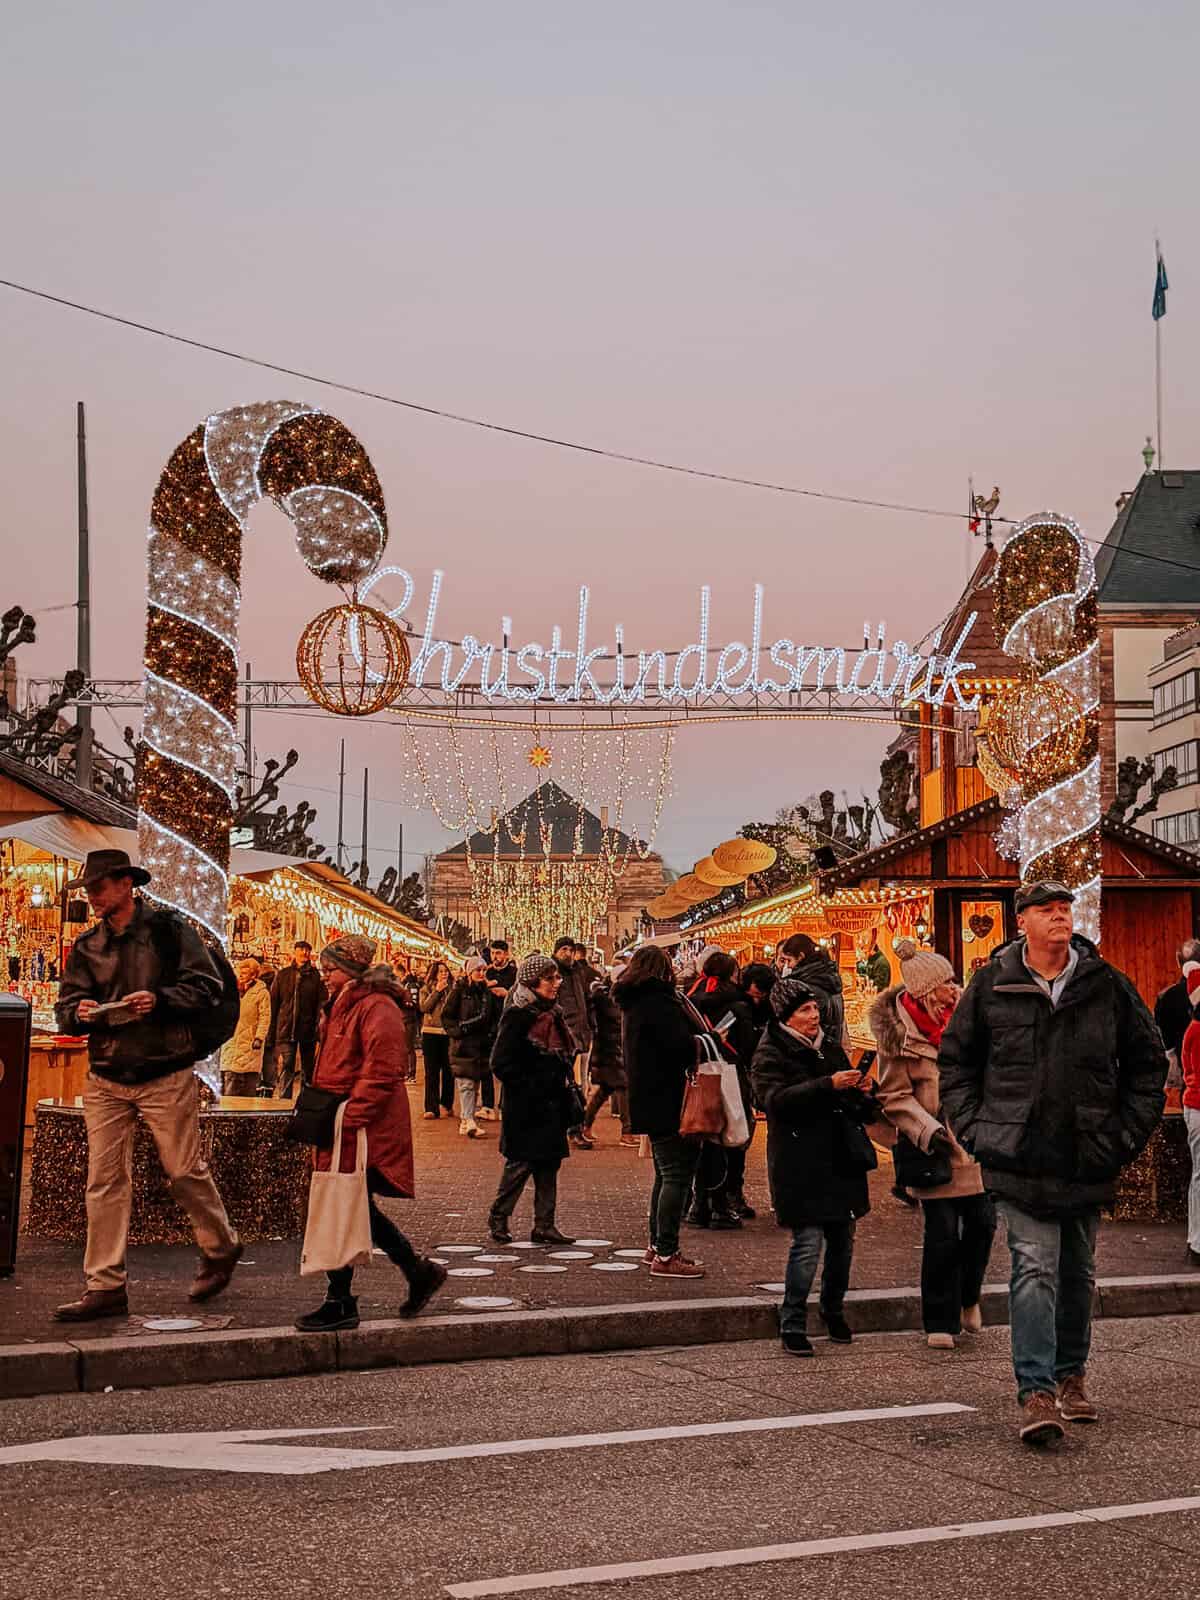 A bustling Christmas market scene during twilight, showing rows of lit stalls under a sign reading 'Christkindelsmärik' with a large candy cane and festive decorations